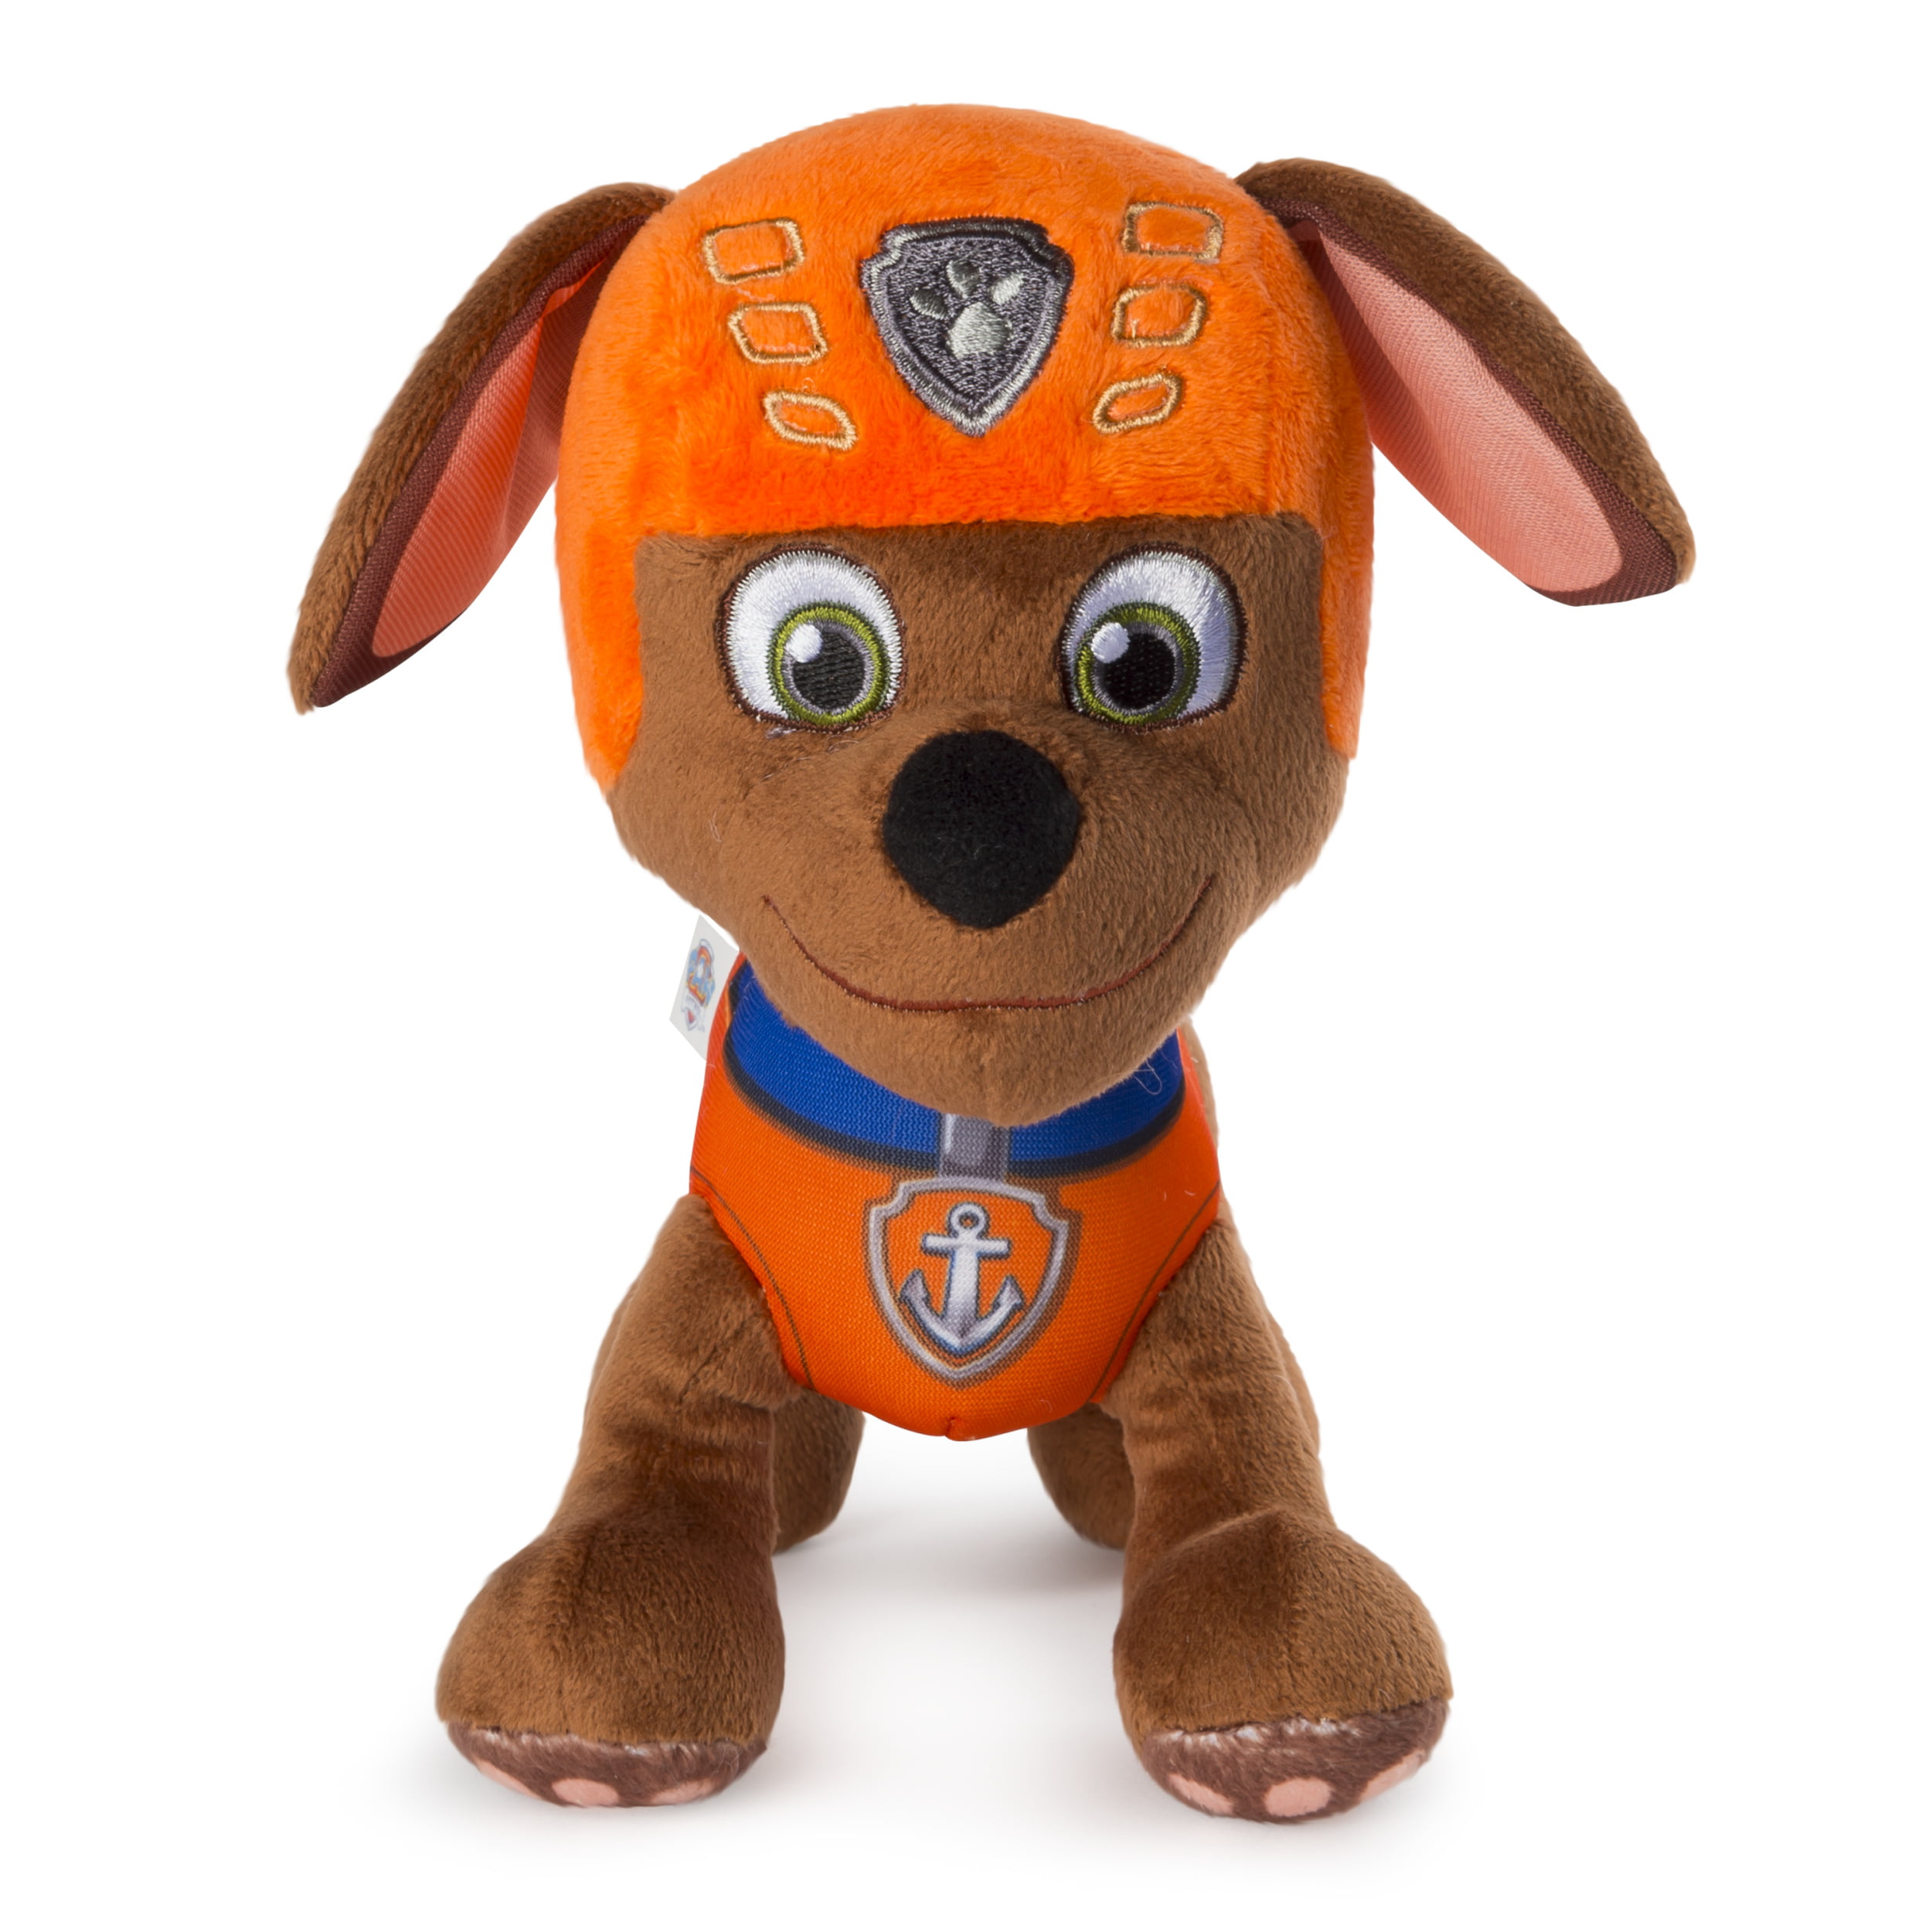 for Ages Paw Patrol Standing Plush with Stitched Detailing 8” Skye Plush Toy 